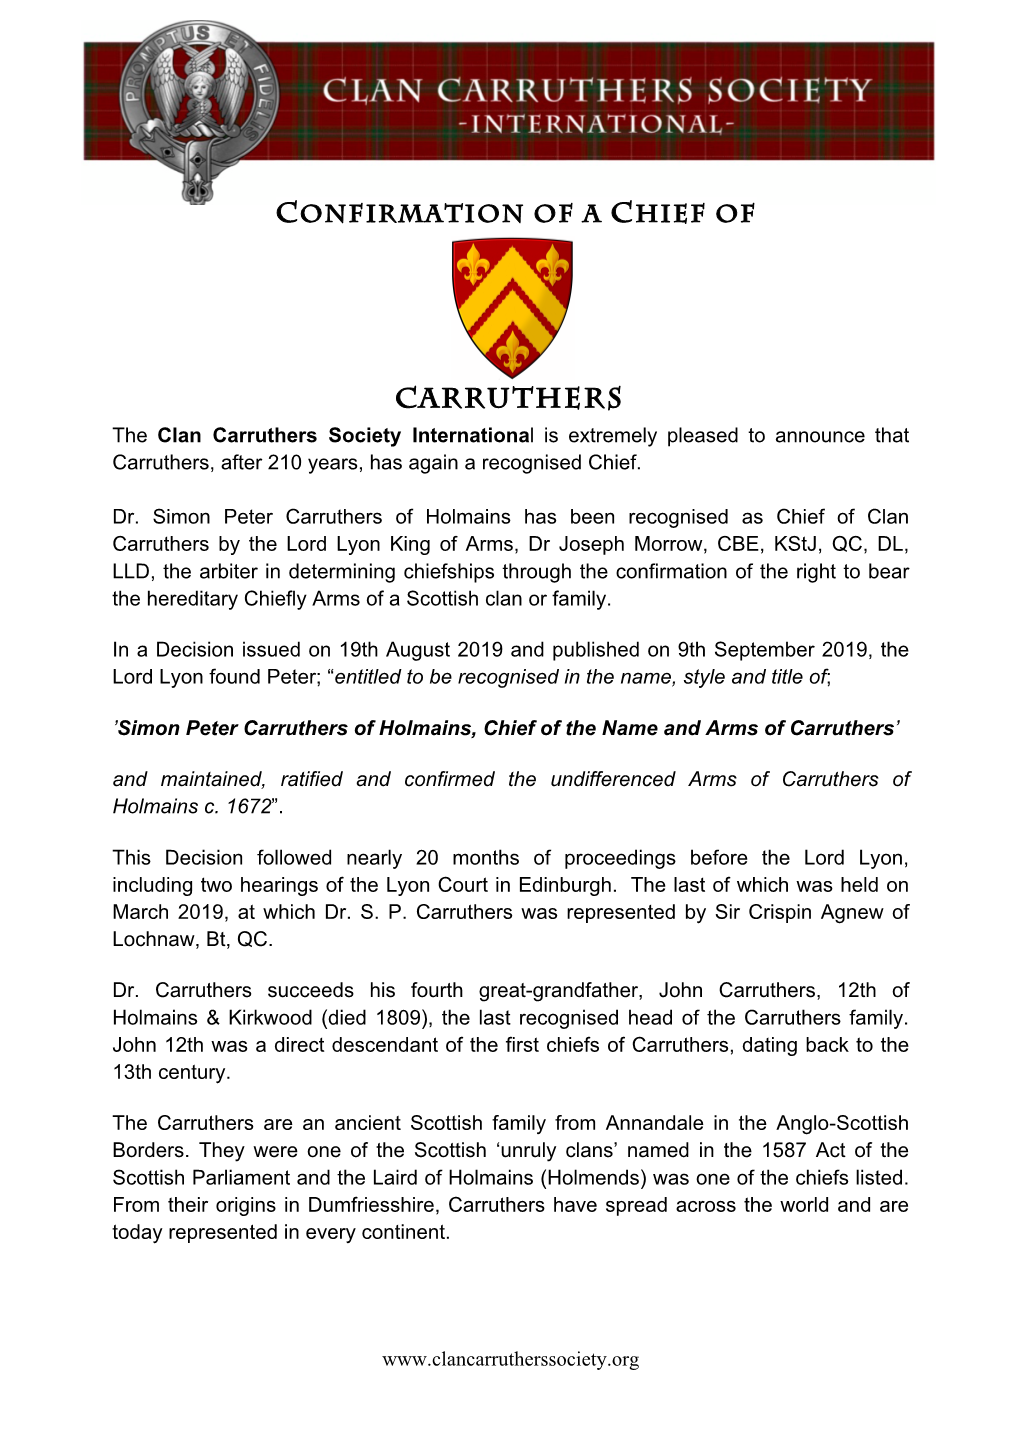 Confirmation of a Chief of Carruthers